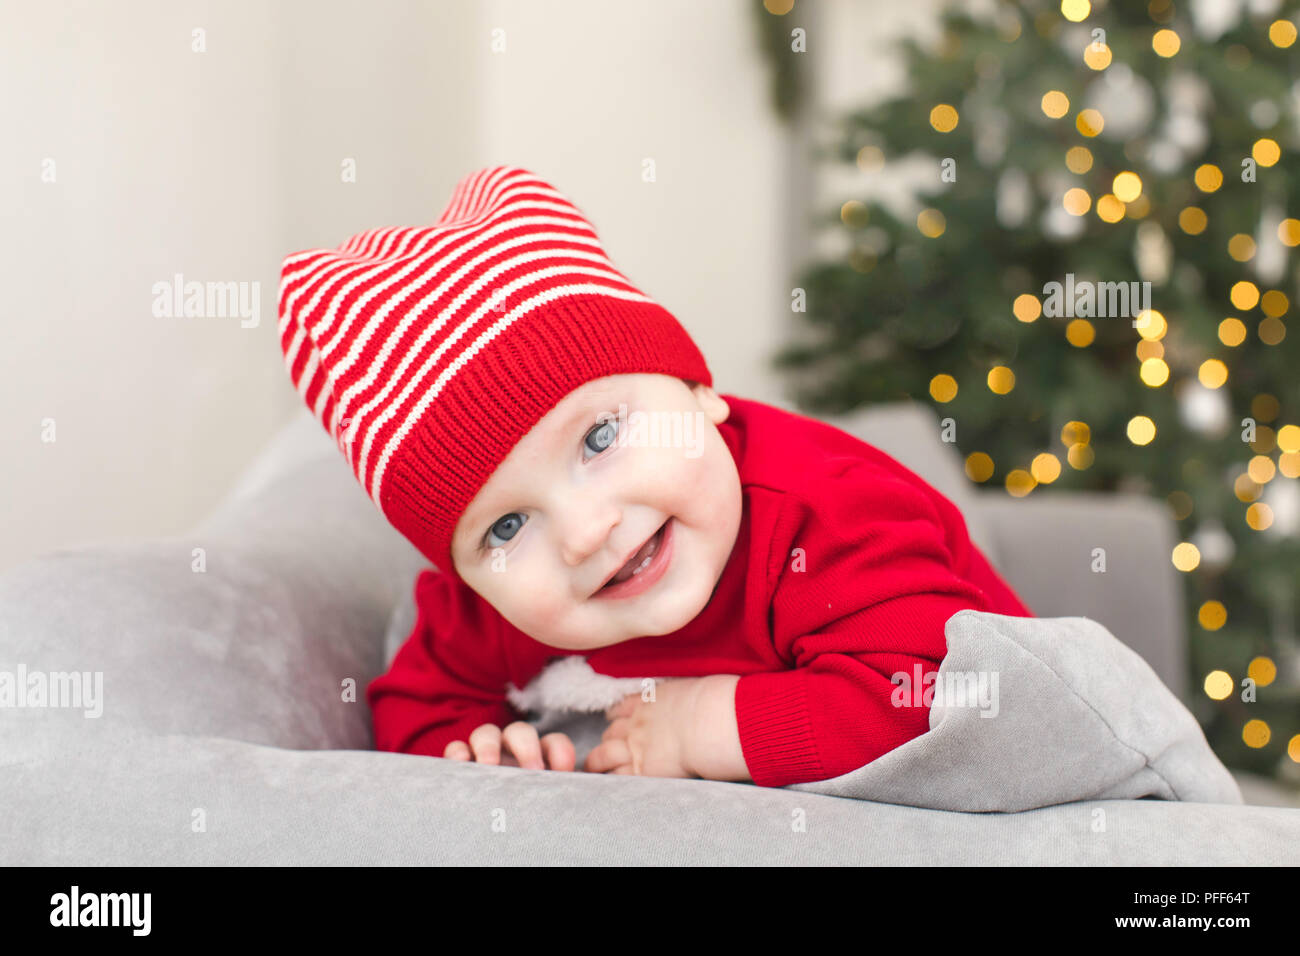 Funny baby in Christmas costume Stock Photo